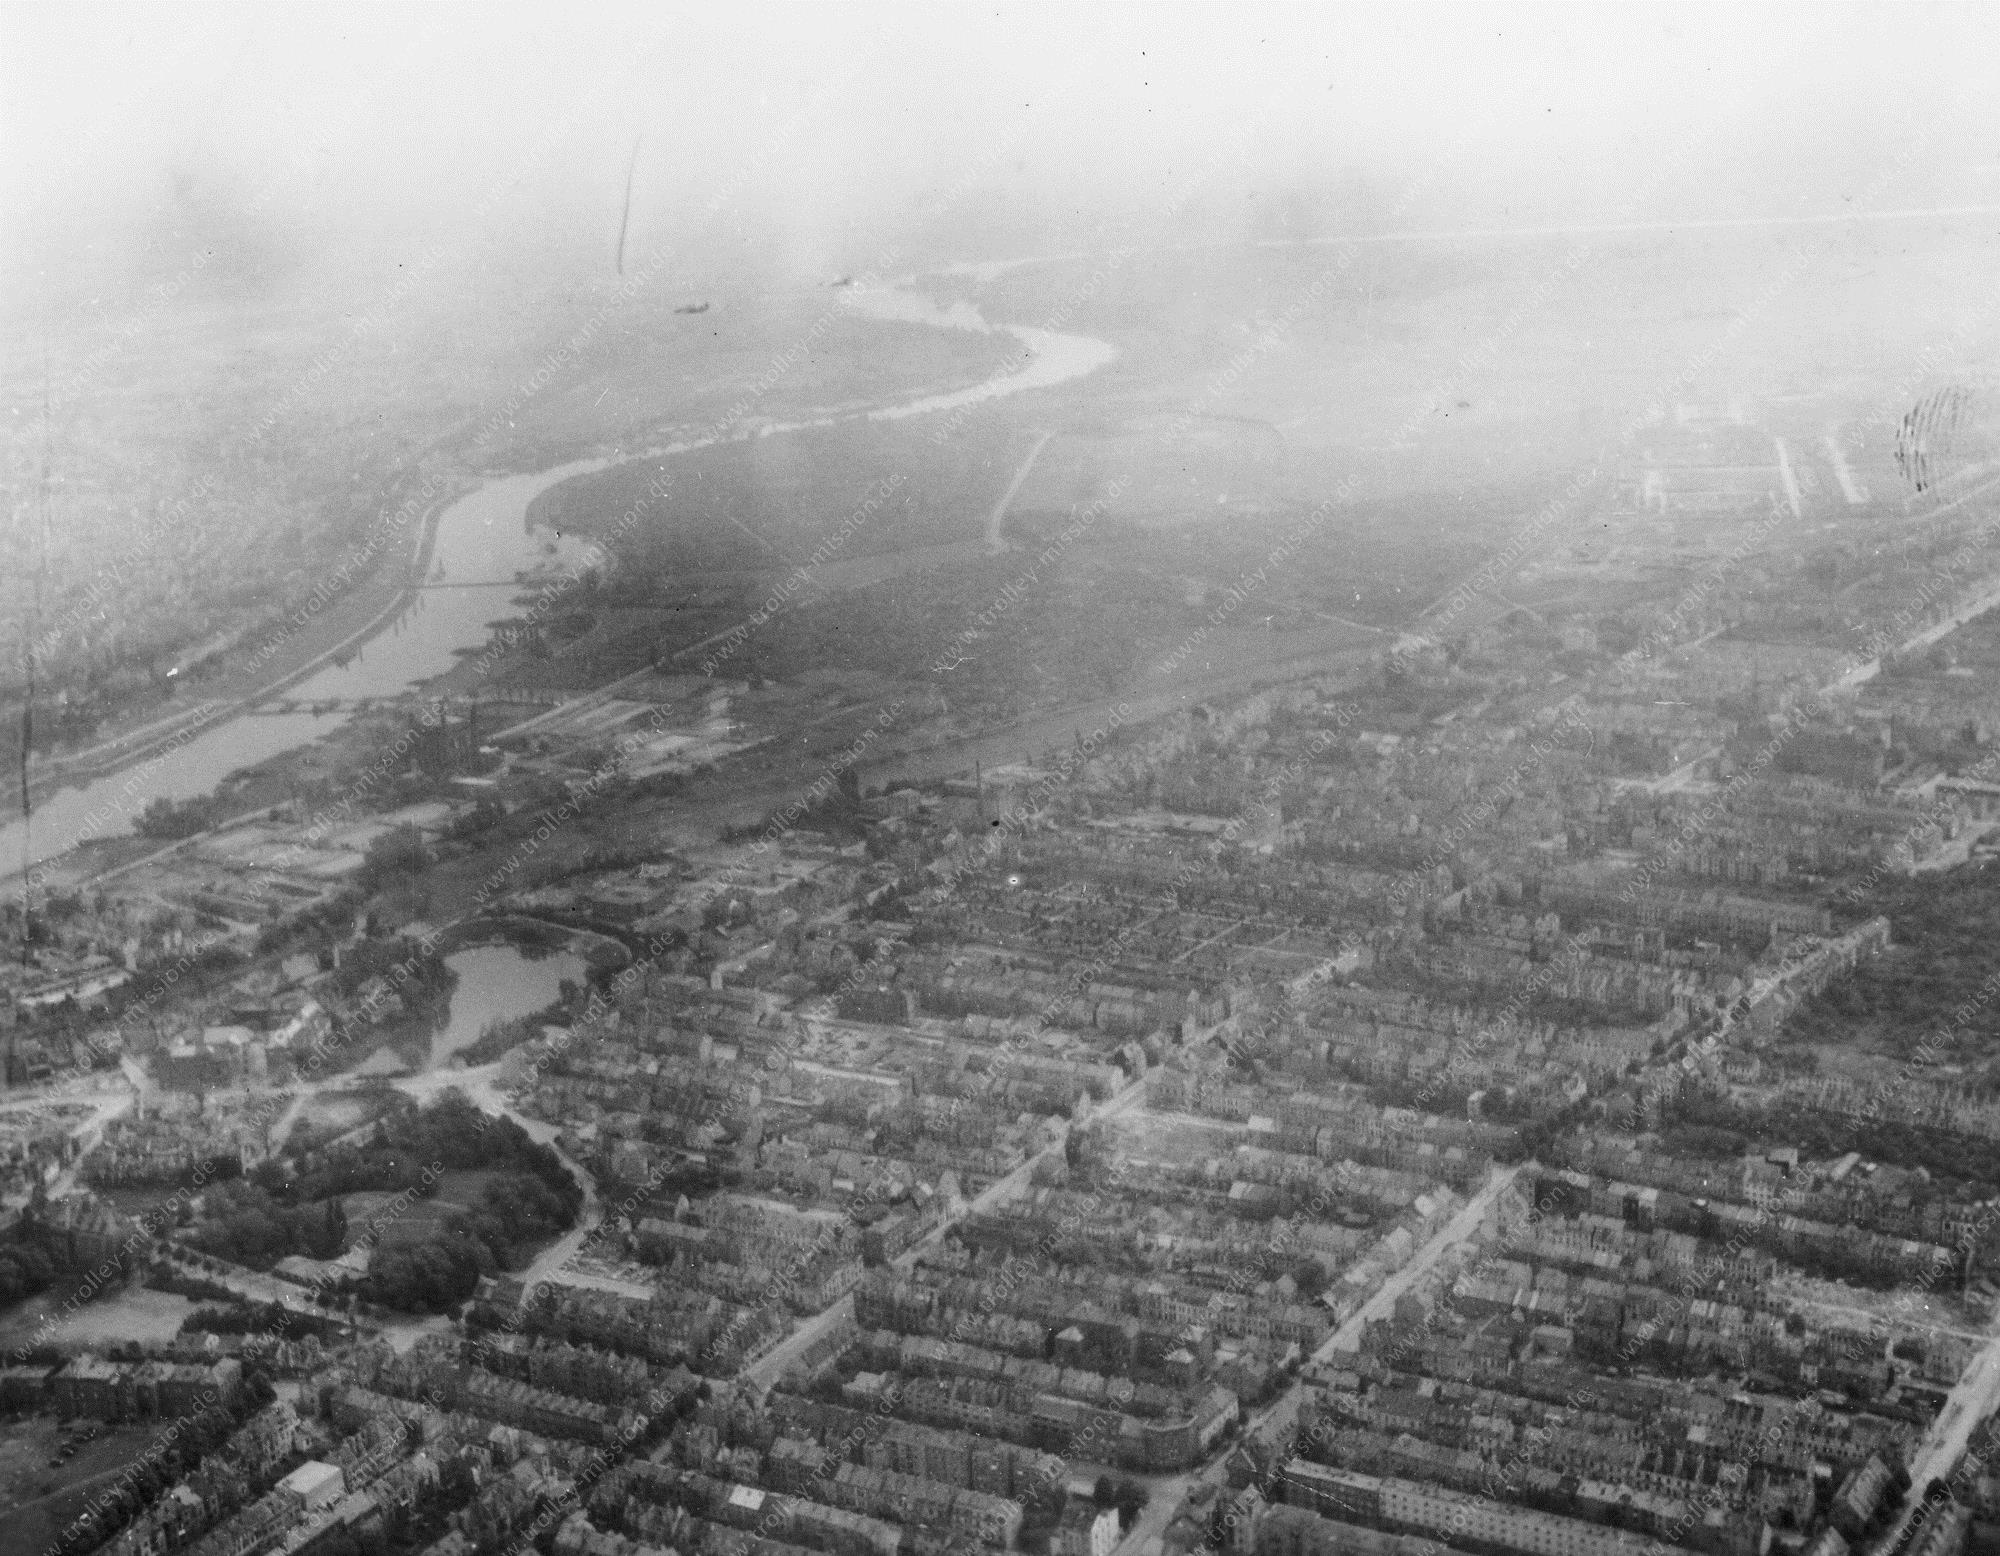 Bremen from above: Aerial view after Allied air raids in World War II